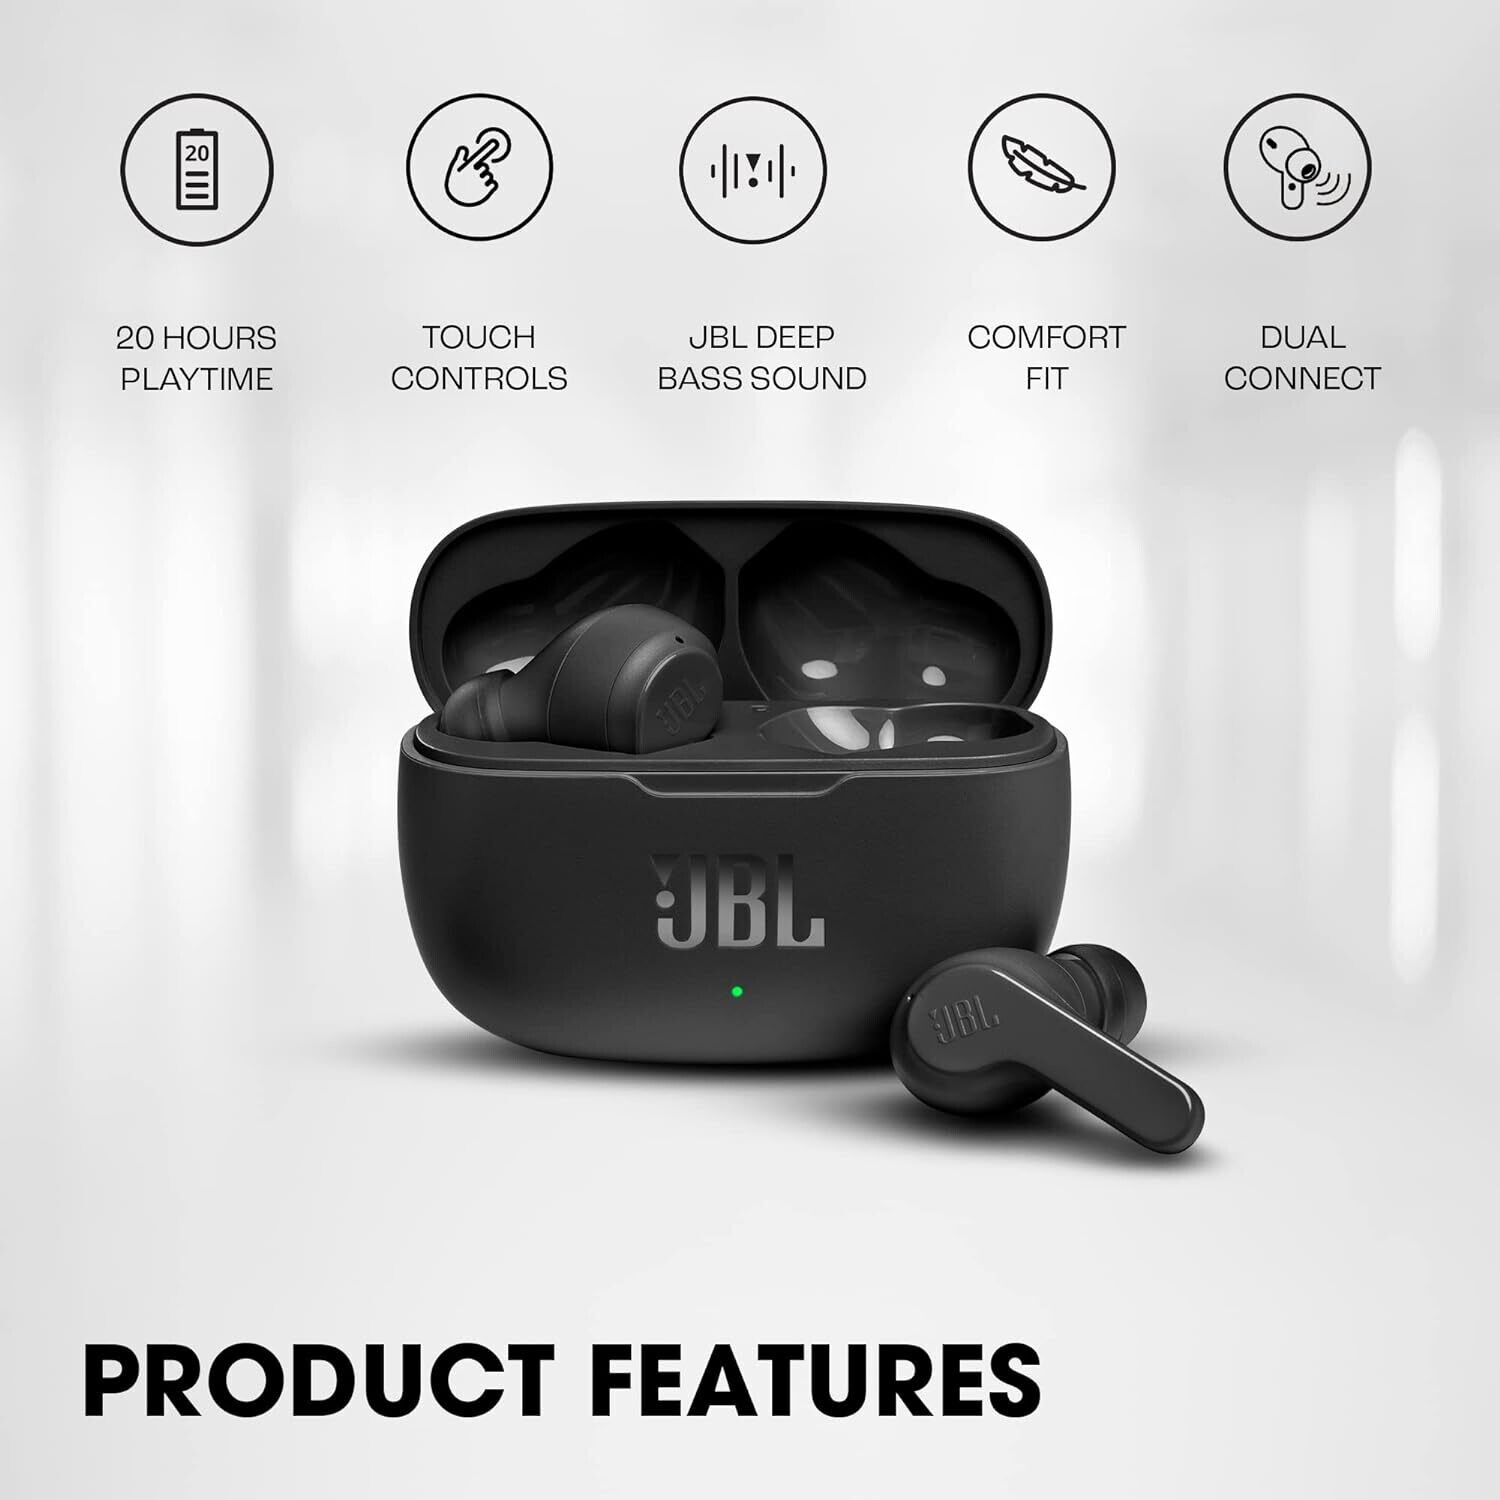 JBL Wave 200 in Ear TWS Earbuds with Mic, 20 Hours Playtime, Deep Bass Sound, Dual Connect Technology, Quick Charge,Comfort Fit Ergonomic Design, Voice Assistant Support for Mobiles (Black)